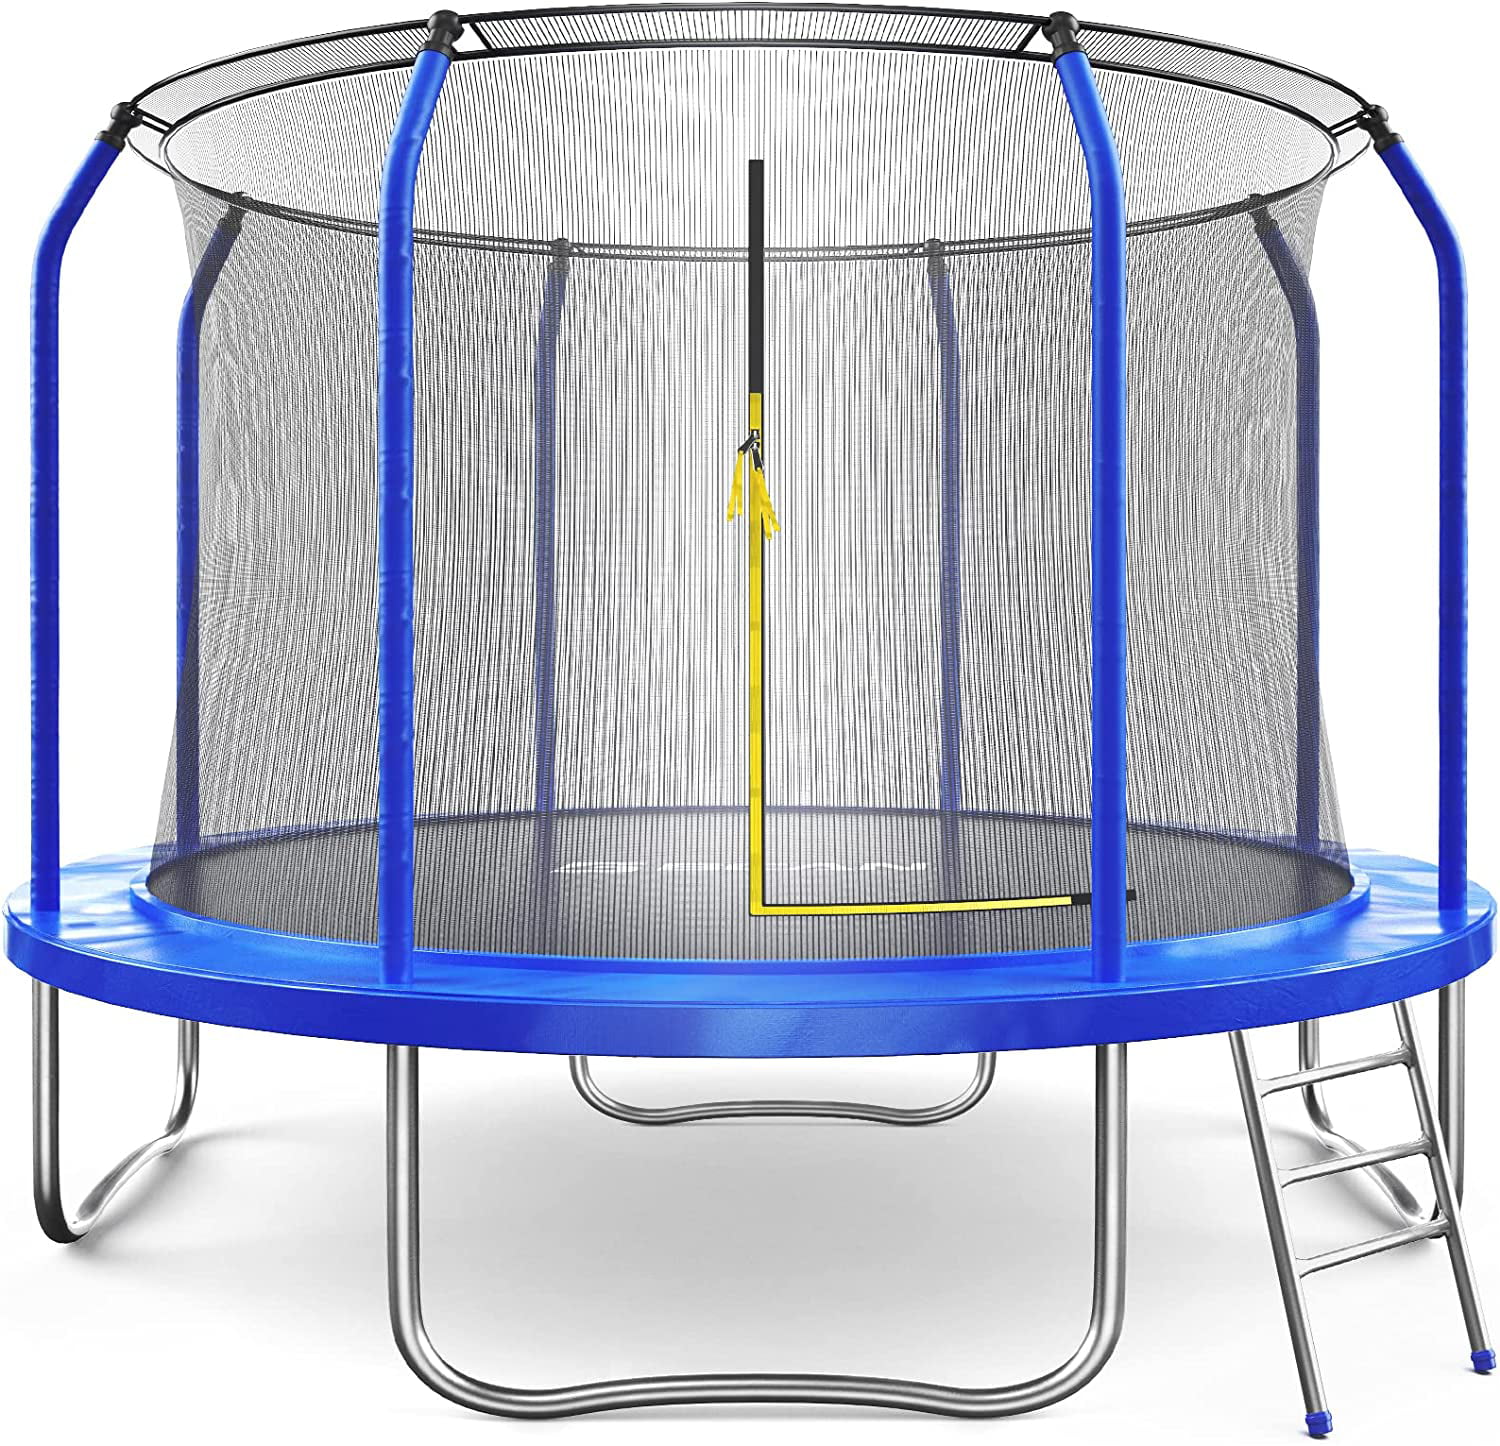 Trampolines 12FT with Enclosure Net 450LBS Weight Capacity Recreational Trampoline for Kids Adults Family Happy Time ASTM Approved 